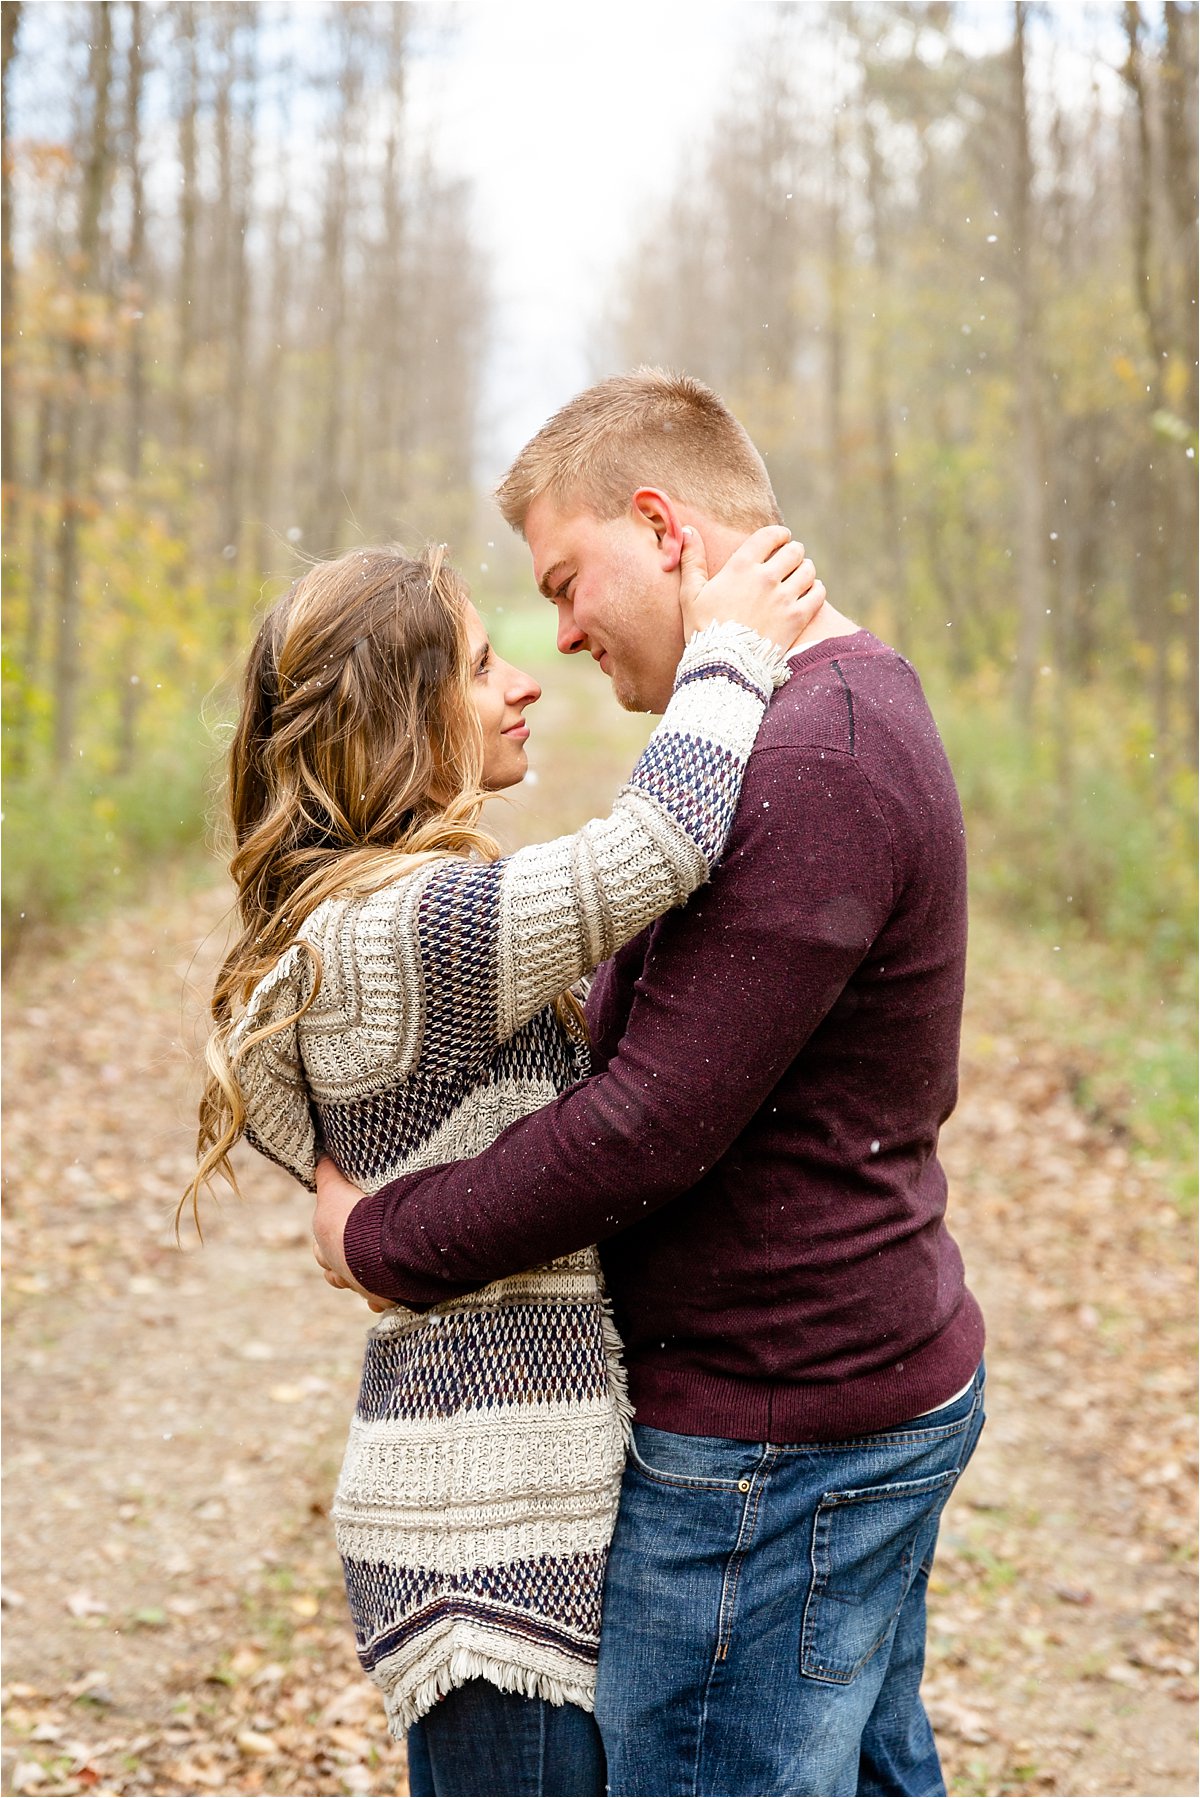 Snowy Outdoor Nature Path Engagement Session in Brussels Ontario taken by Dylan and Sandra Photography